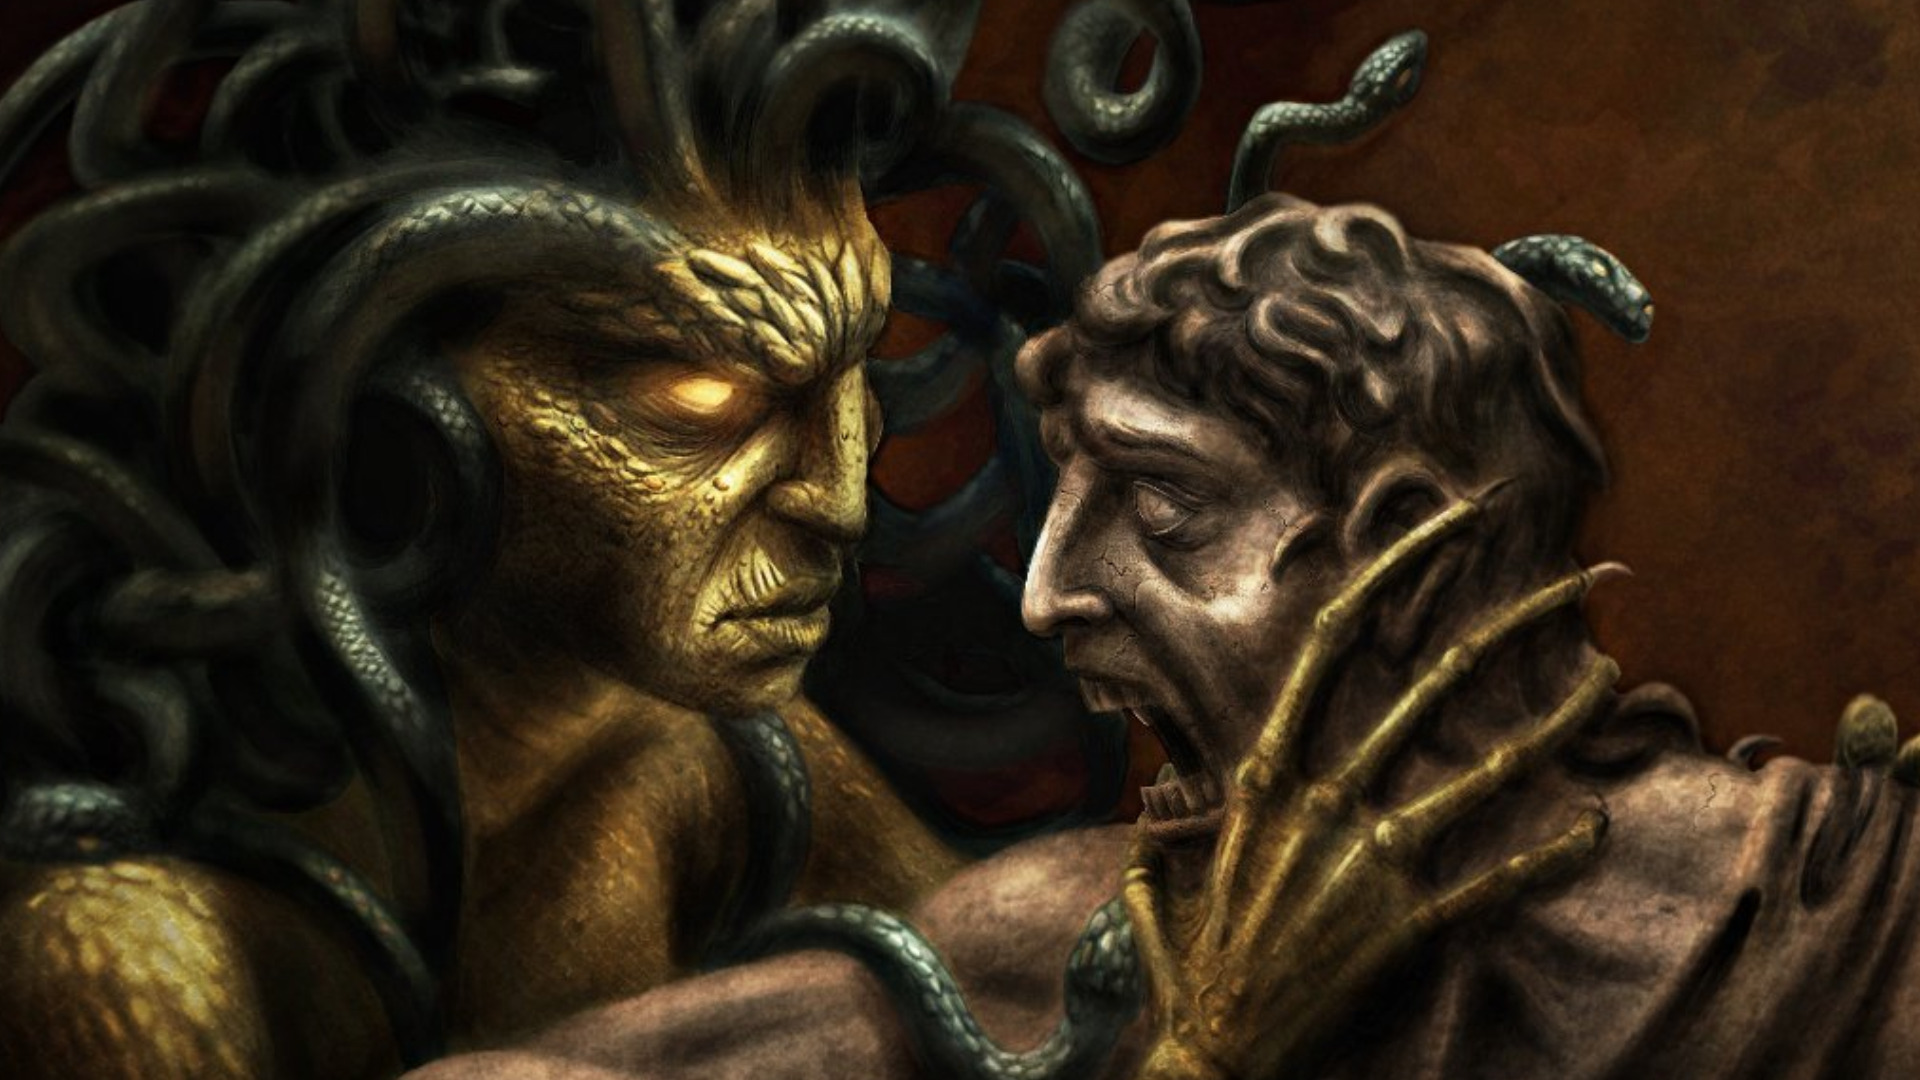 Large Medusa Backgrounds GsFDcY WP Collection 1920x1080